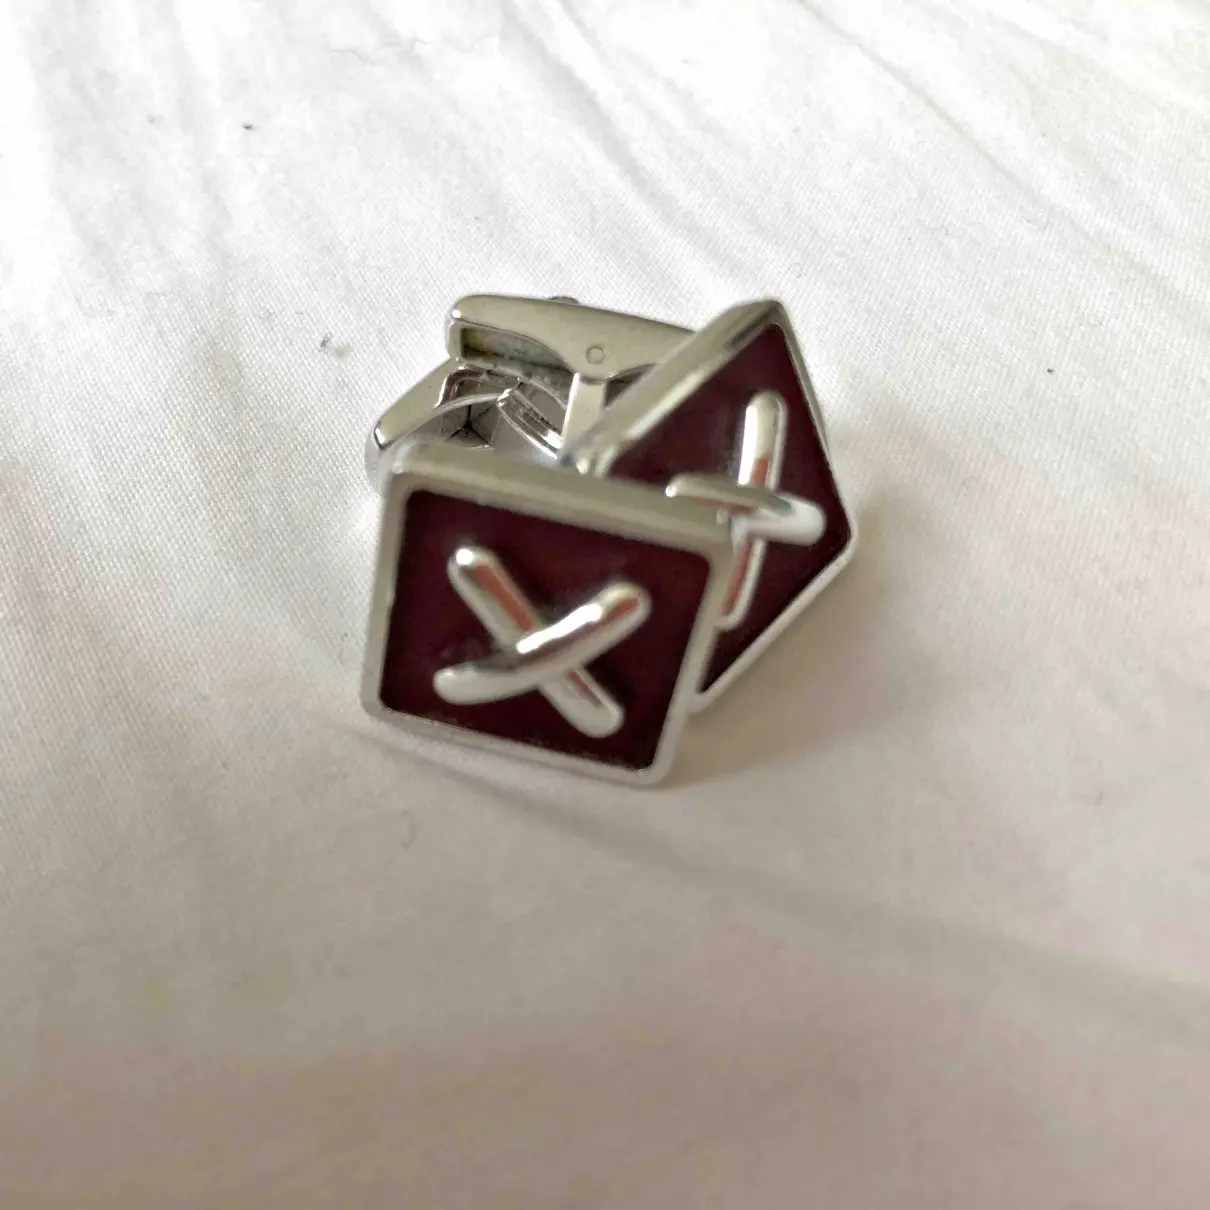 Alfred Dunhill Silver cufflinks for sale - Vintage